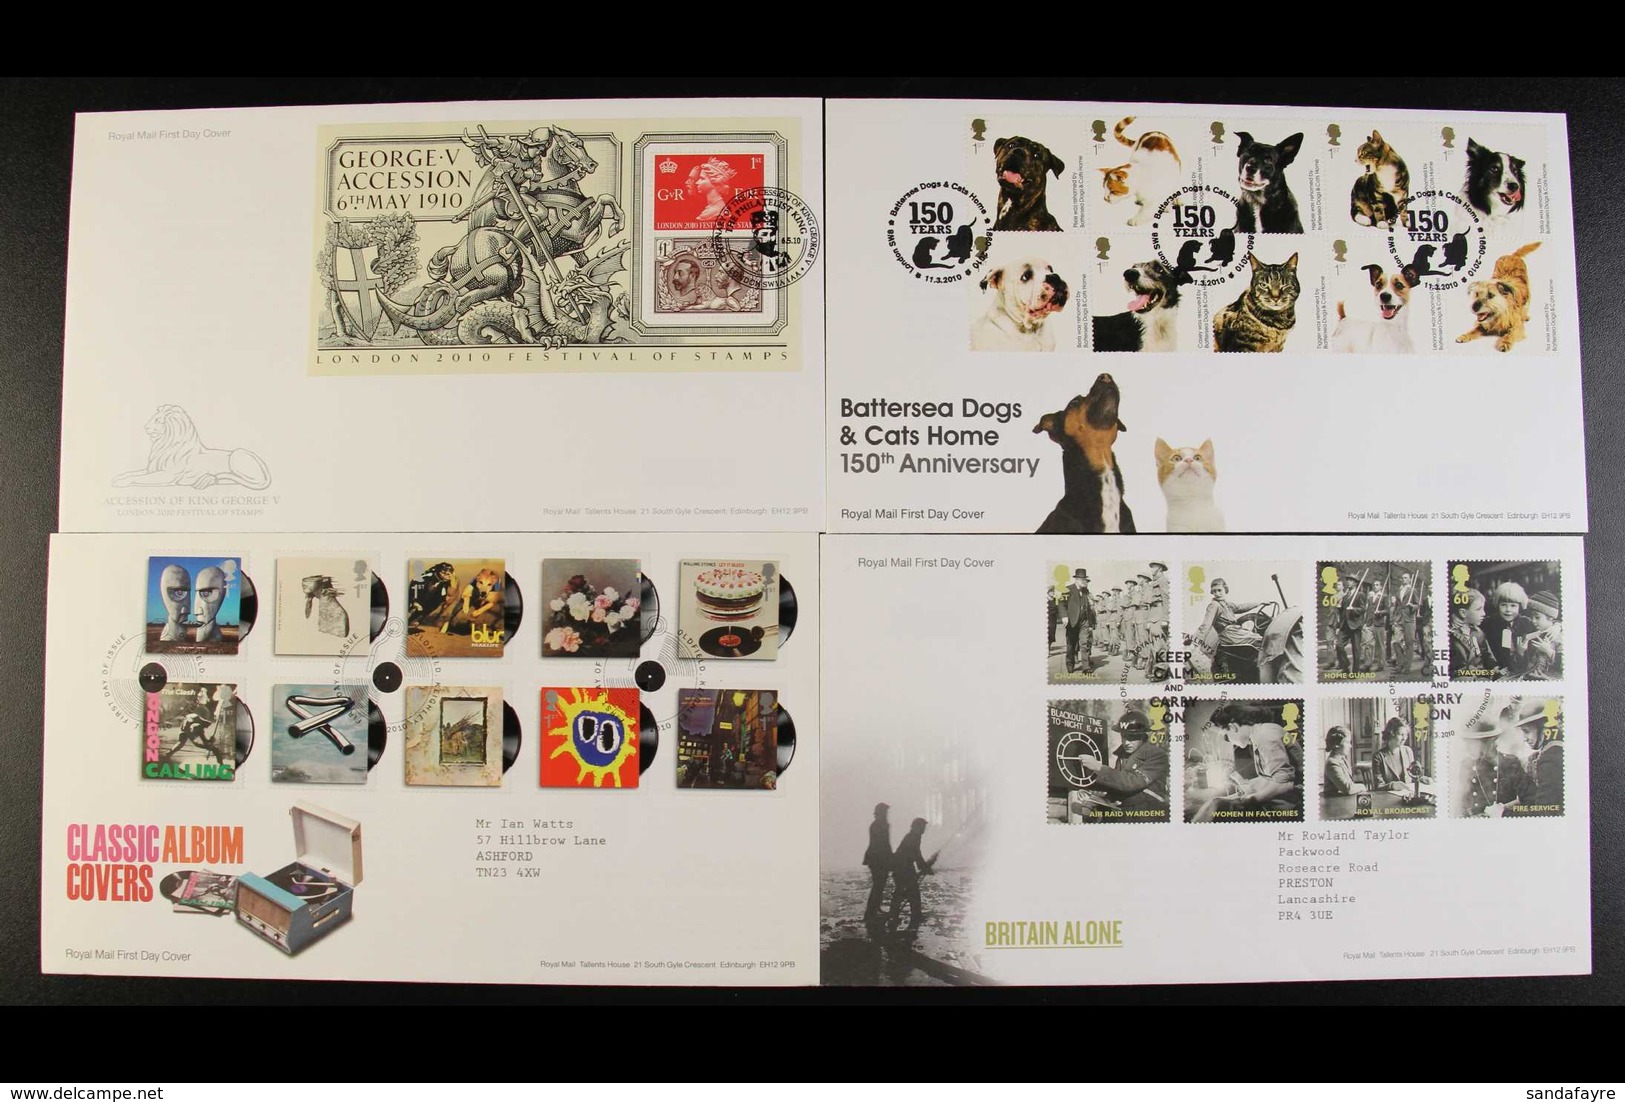 2010-11 FIRST DAY COVERS GROUP  A Delightful  Group Of Commemorative FDCs, From 2010 Album Covers, Incl. 2010 & 2011 "Po - FDC